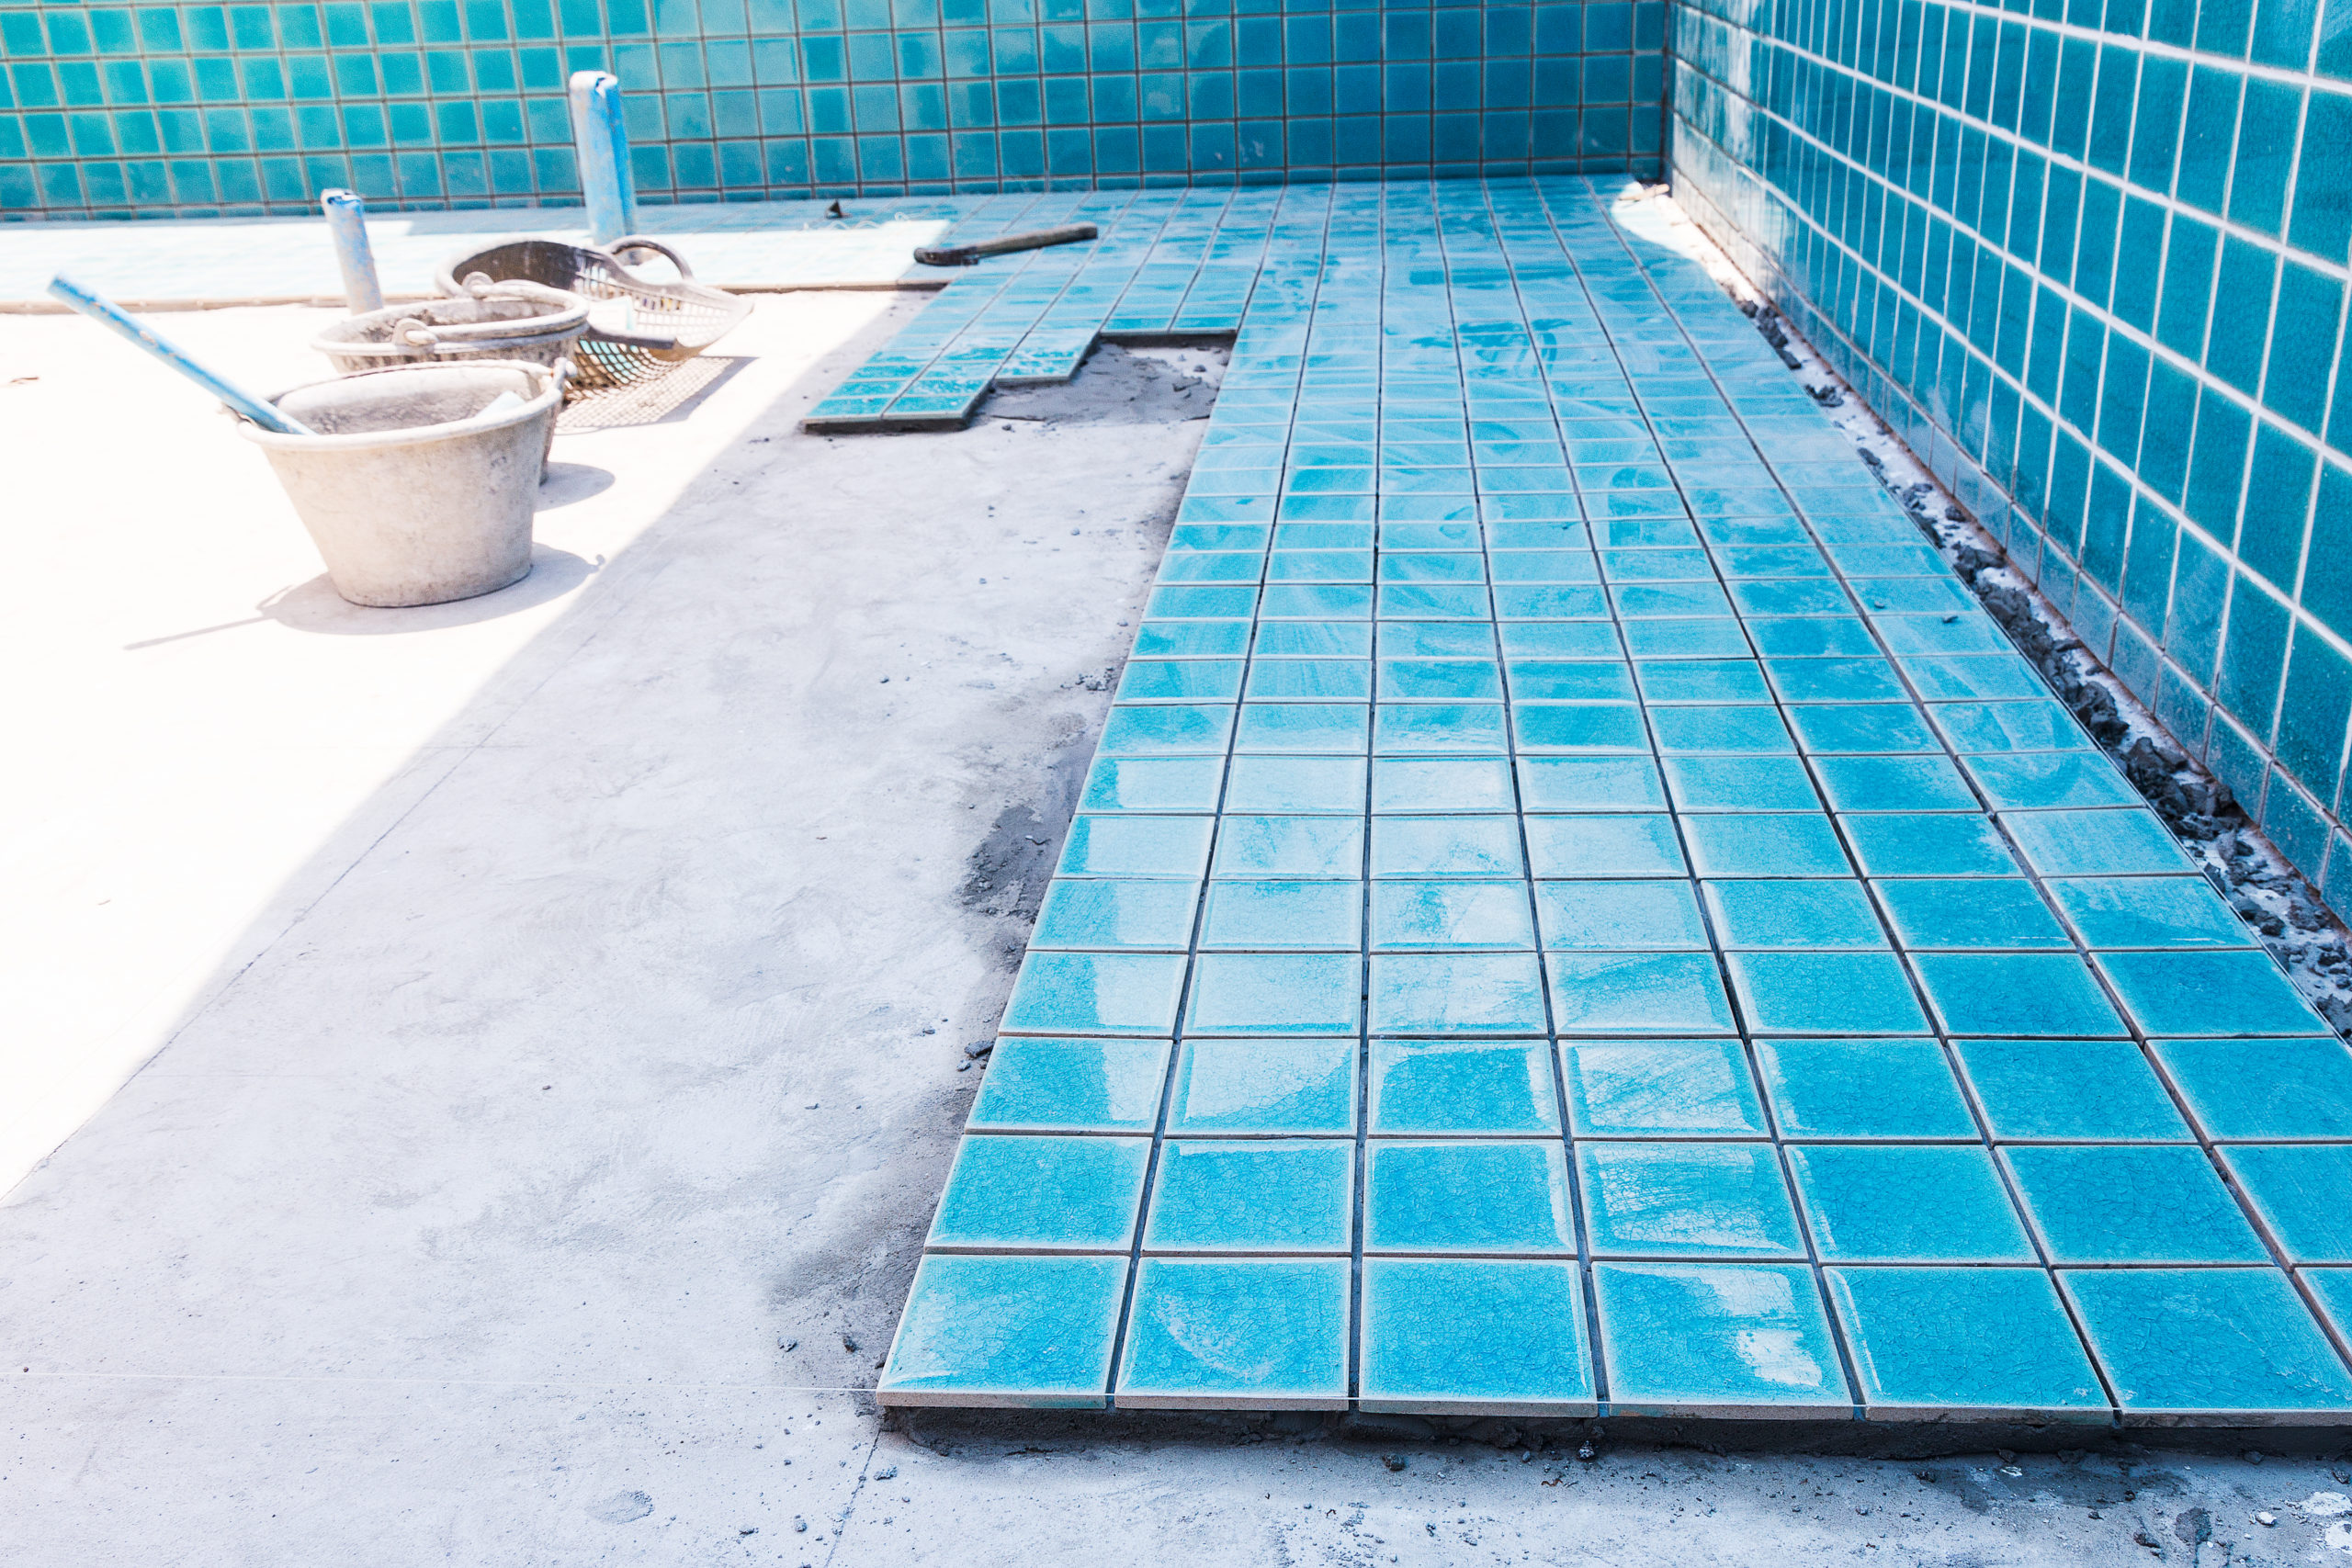 Workers are in the process of laying tiles on the pool floor, carefully aligning and setting them to create a durable and visually appealing surface for the pool.